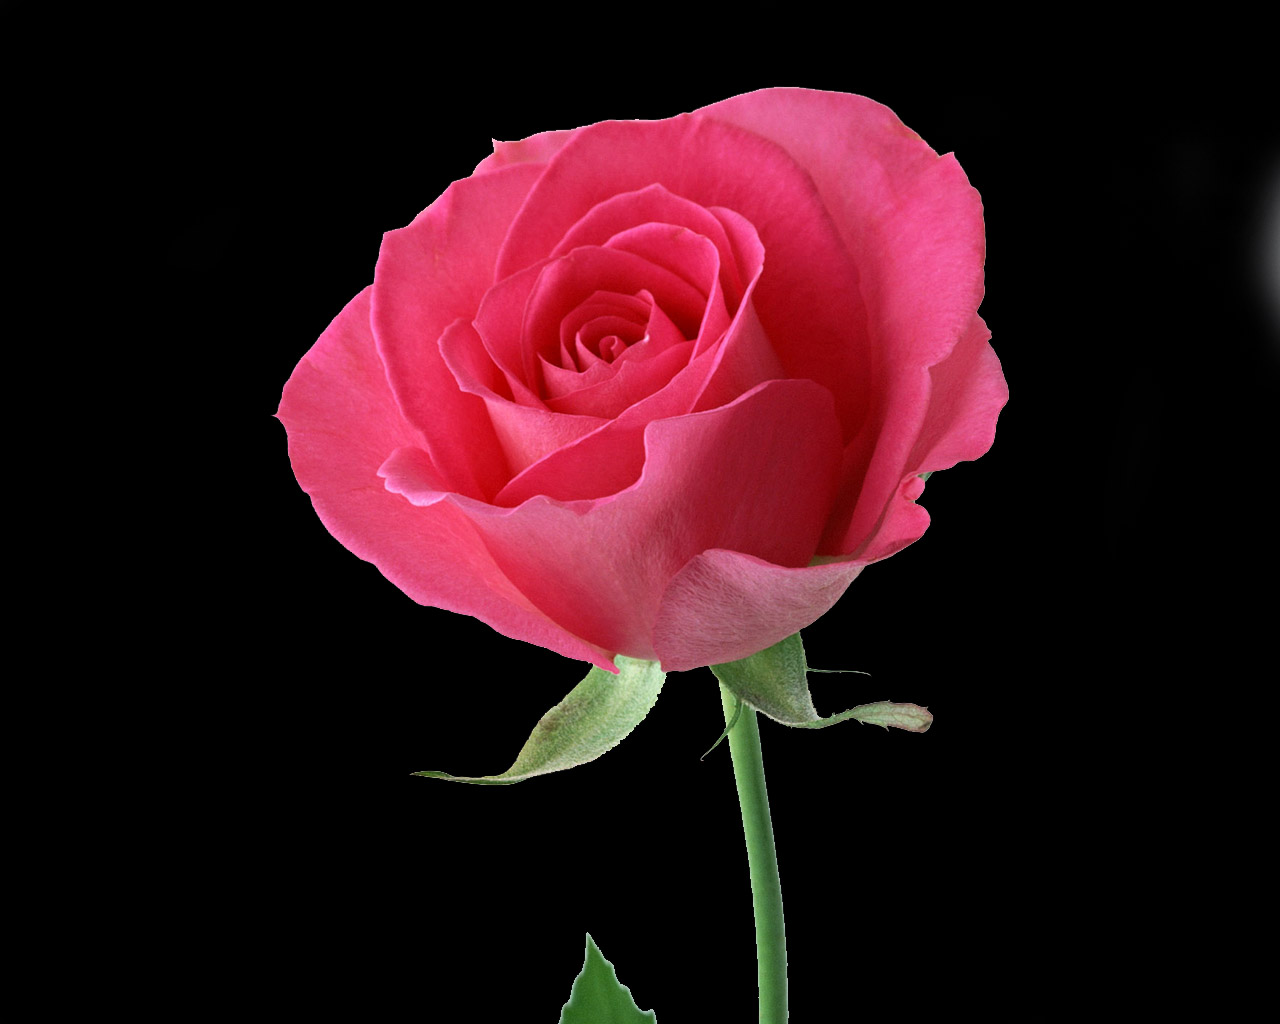 50 Most Beautiful Rose Flowers Wallpapers On Wallpapersafari,How To Decorate Your Room On A Low Budget